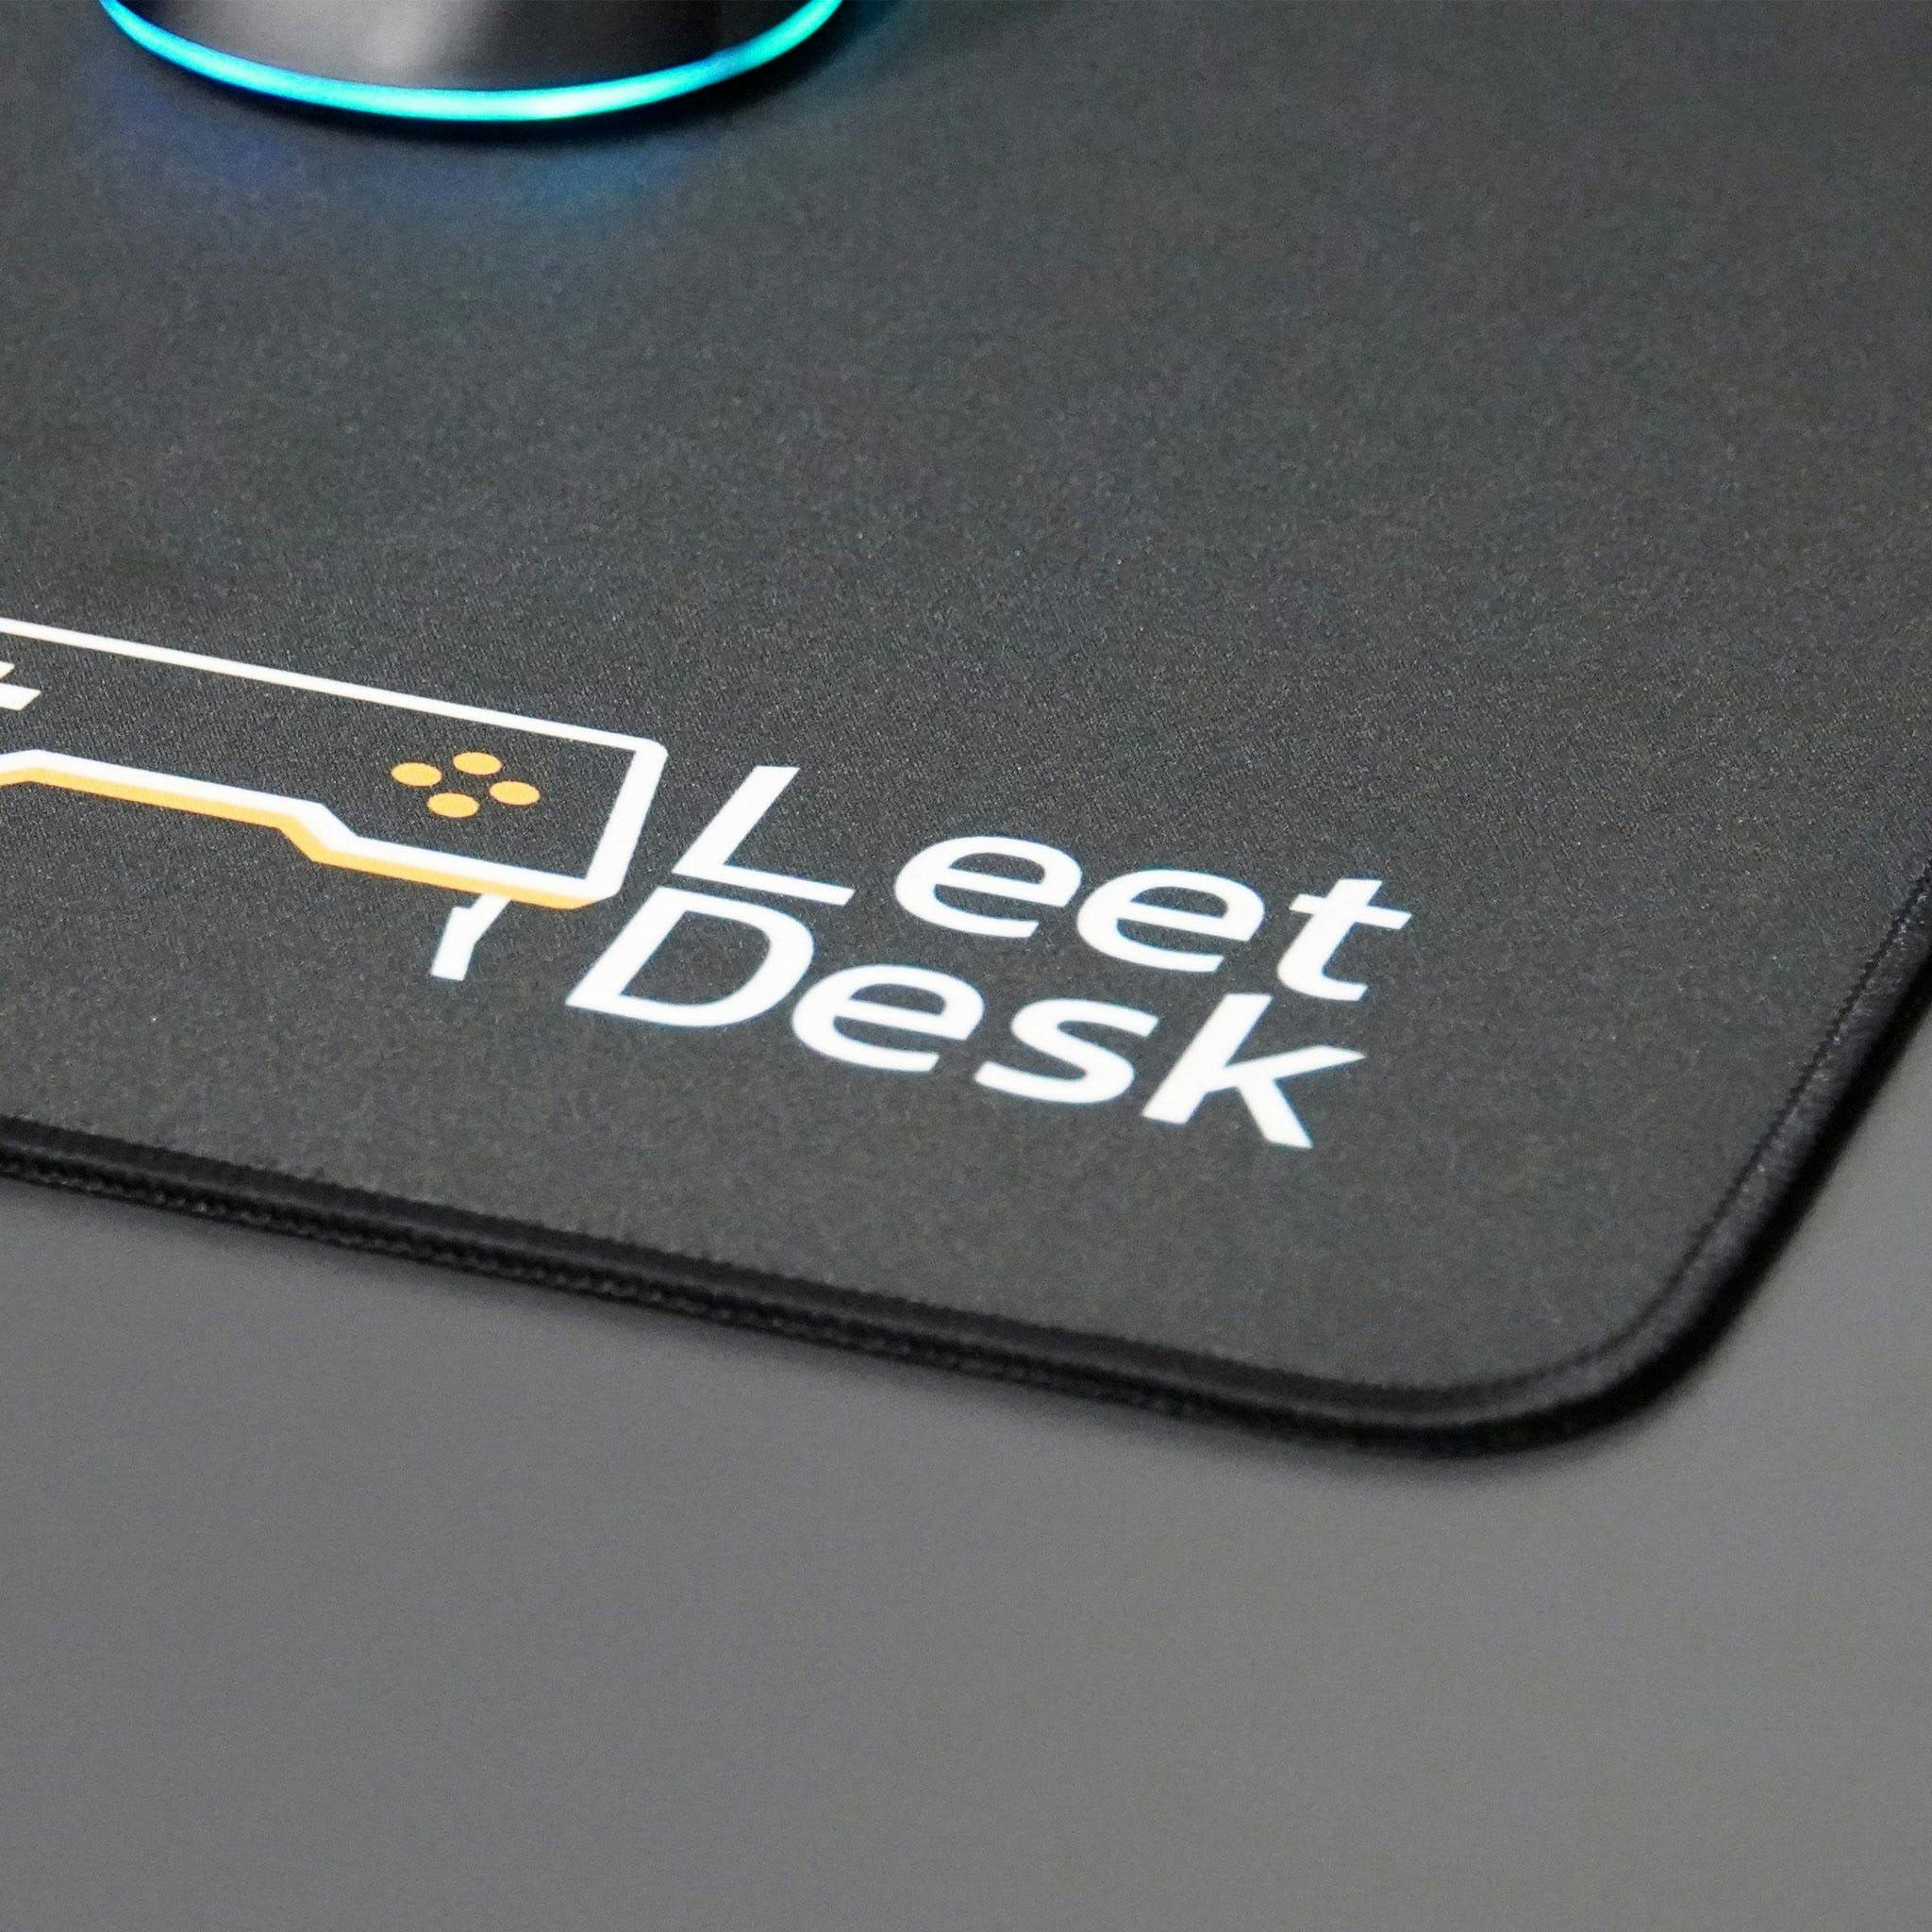 High-end quality gaming mousepads